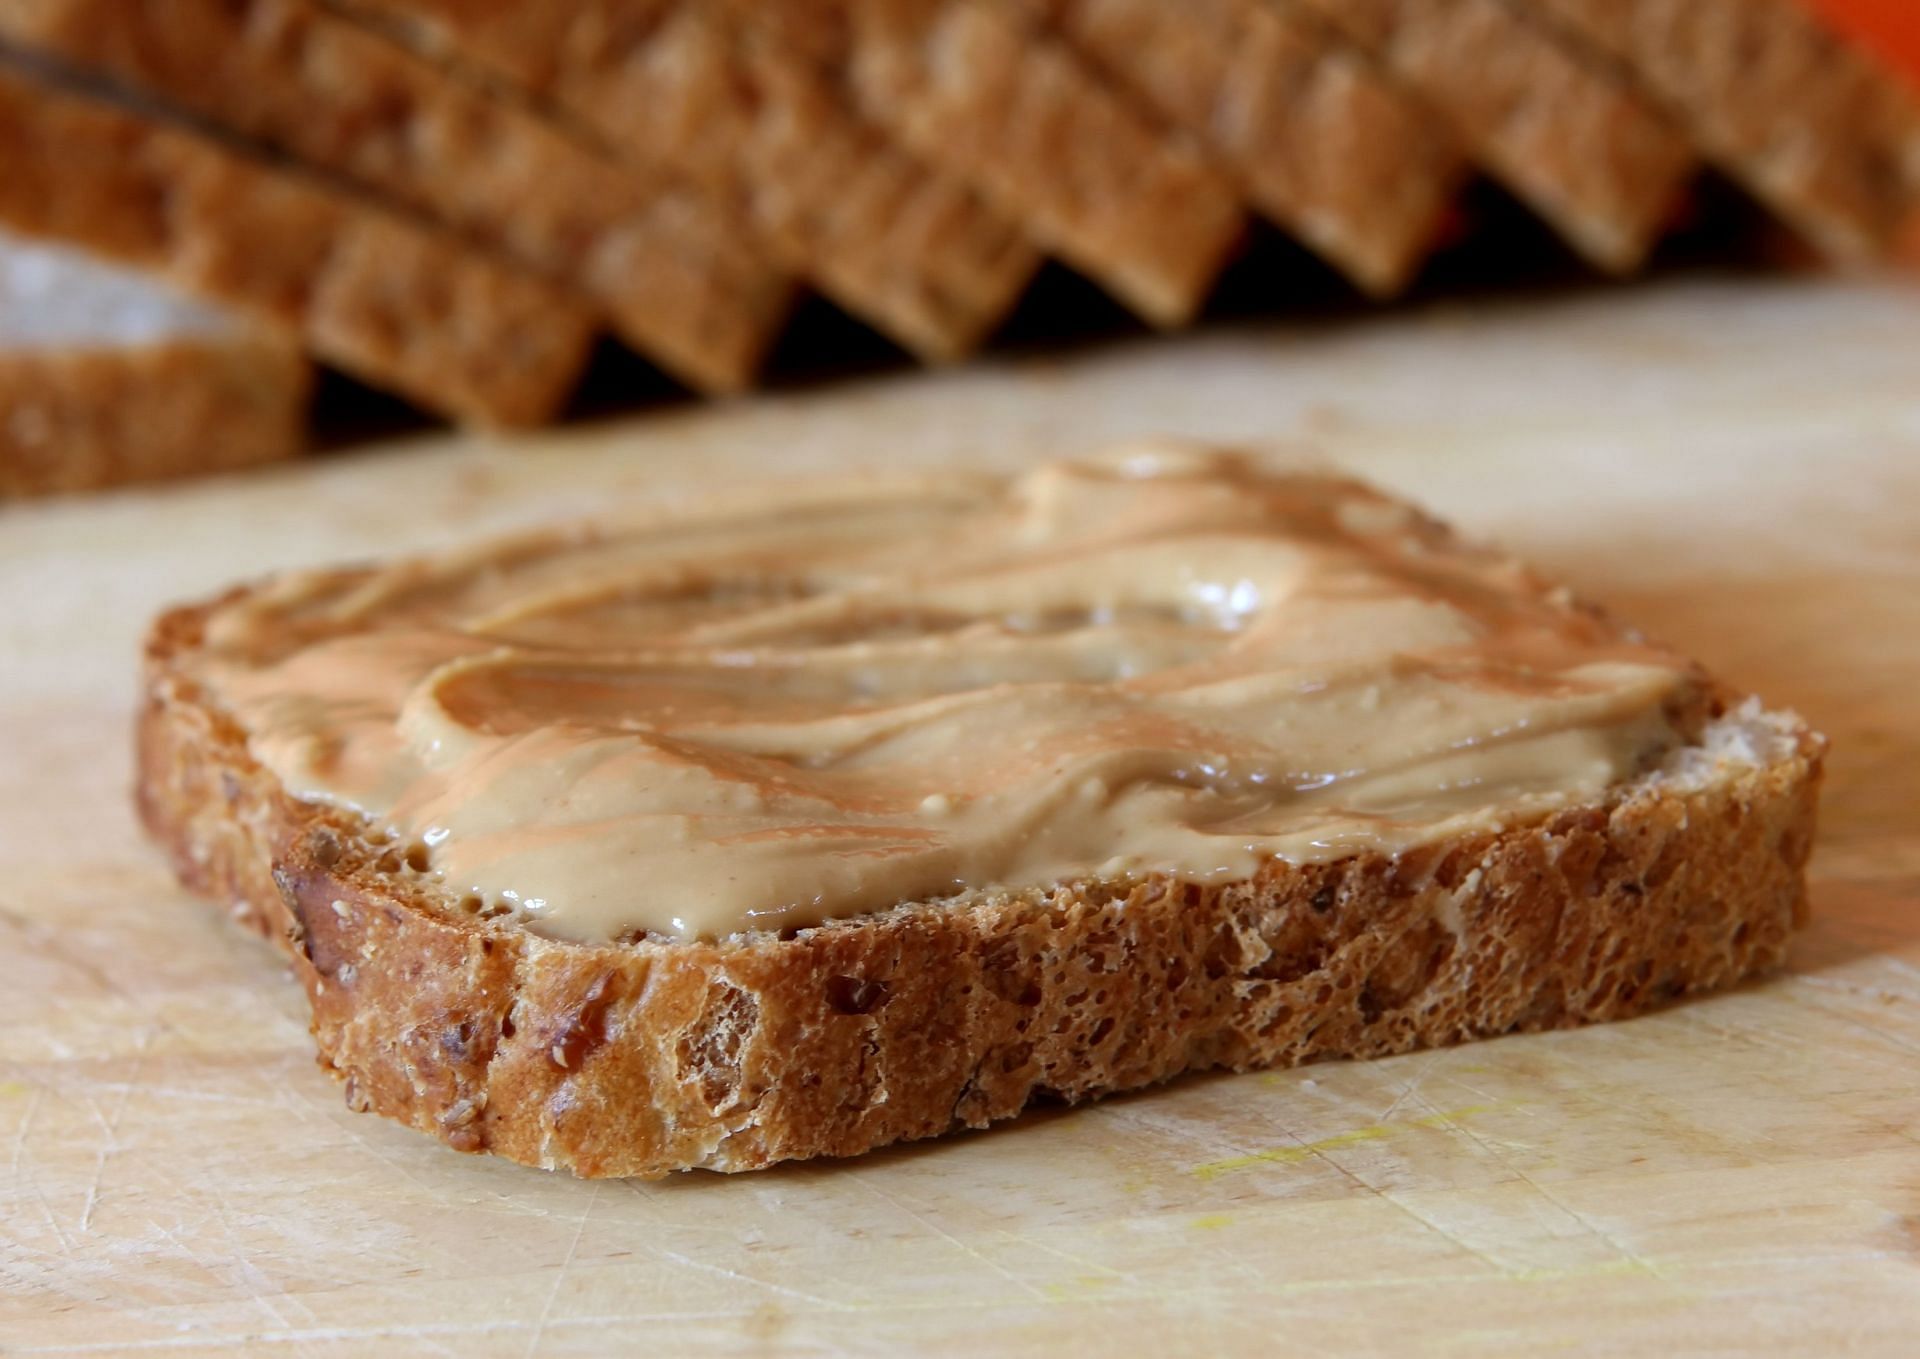 Peanut butter with bread makes a delicious snack.(Image via Pexels/ Robbie Owenwahl)